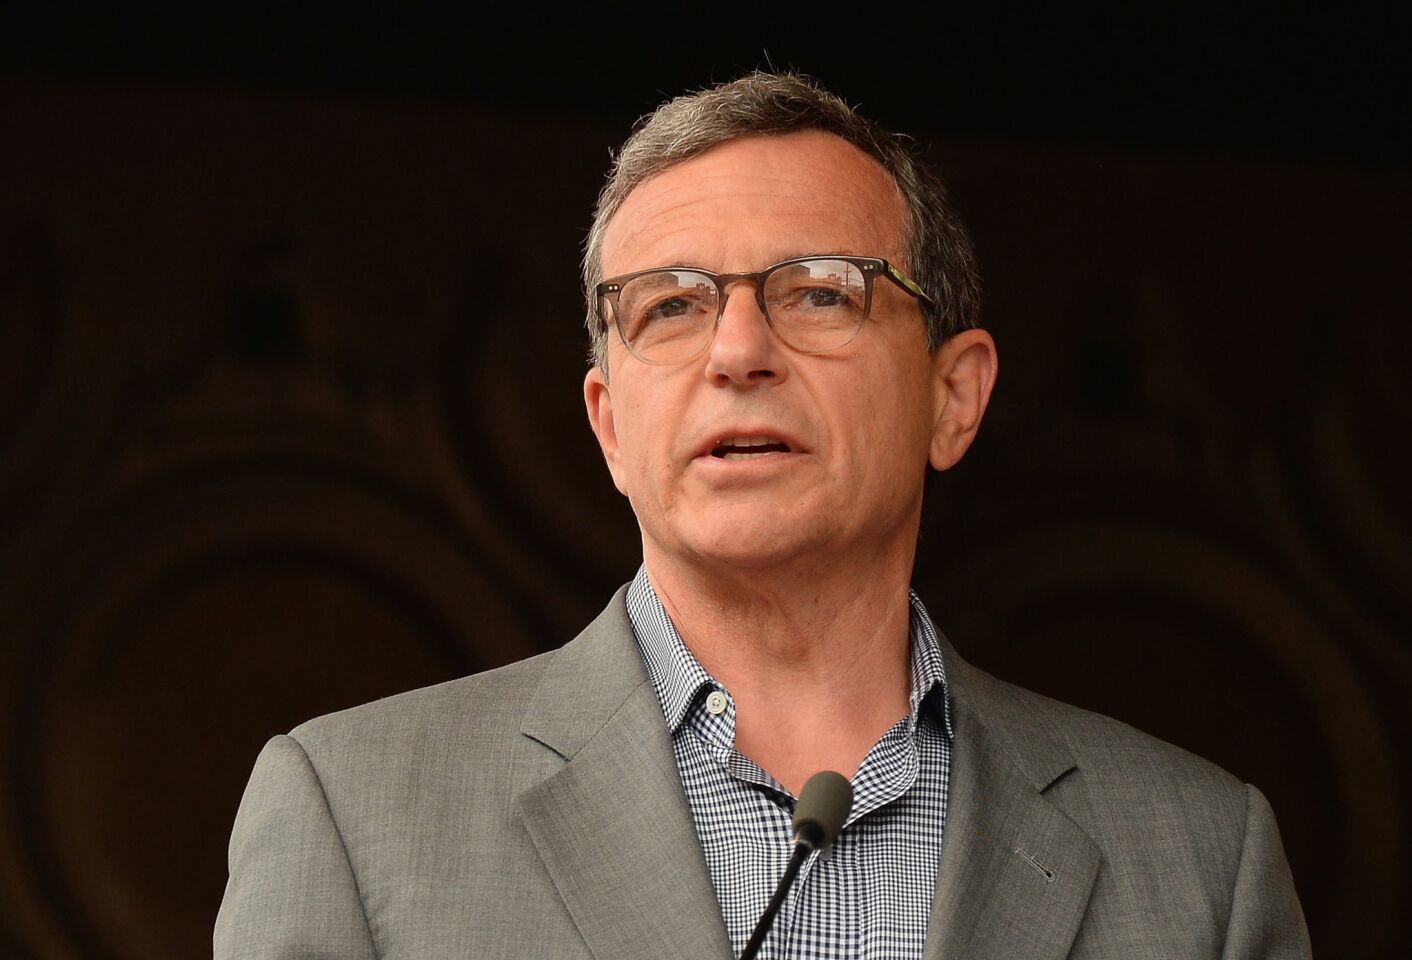 Iger, chief executive of Walt Disney Co., received a compensation package of $34.3 million, down about 15% from 2012. Iger's pay is linked to Disney's financial performance, and since Disney didn't outdo its own expectations, Iger's bonus suffered.